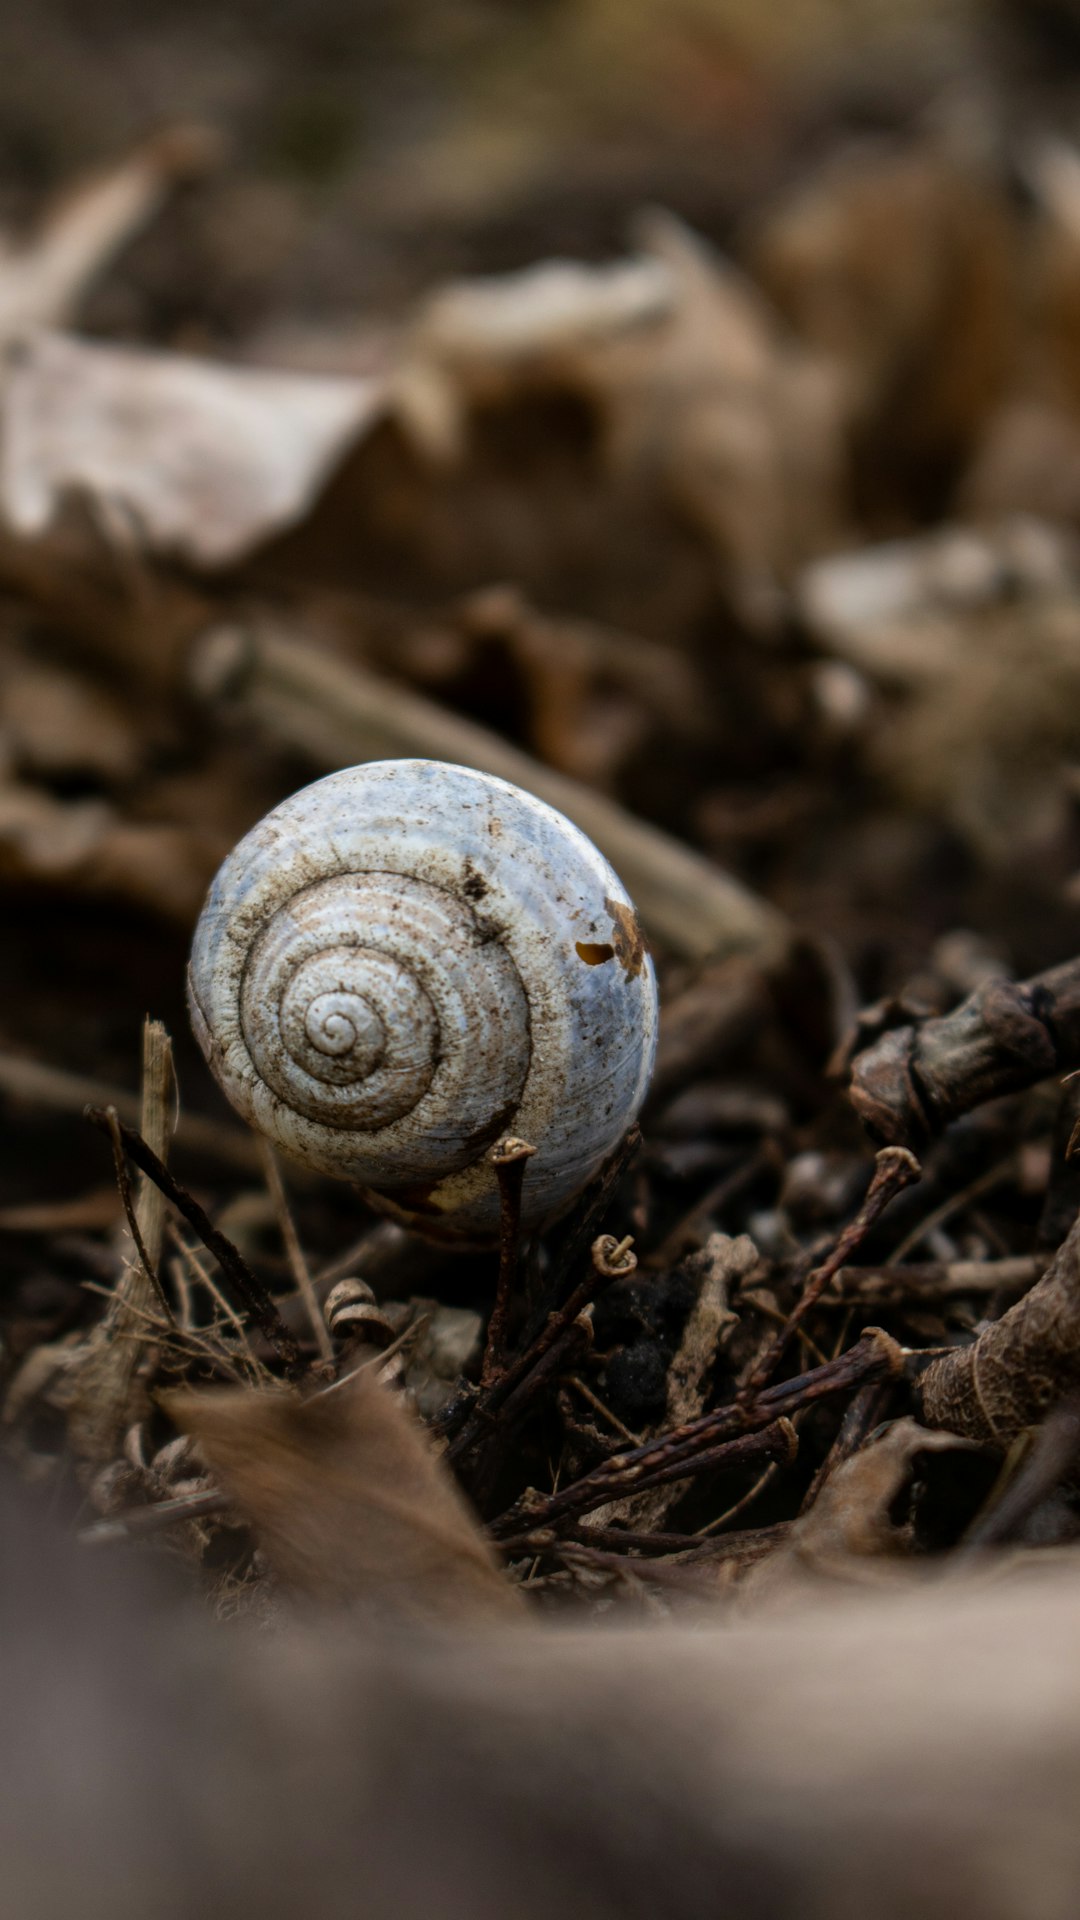 white and gray snail on brown dried leaves